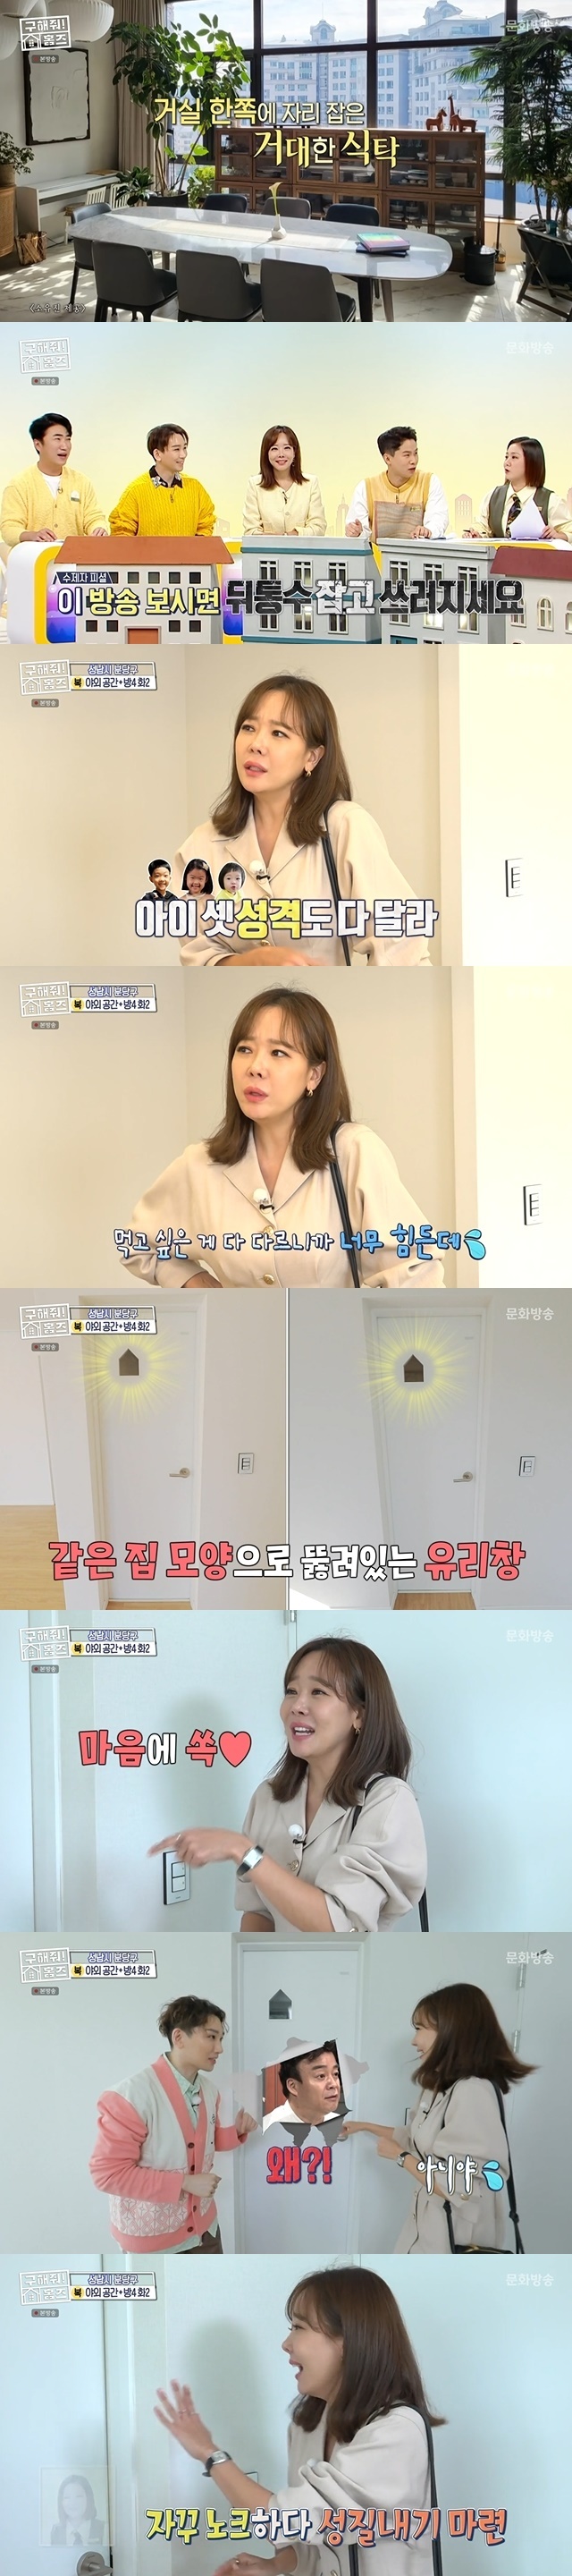 Complaints (Homes)So Yoo-jin is three siblingsand a real episode of Baek Jong-won.In the 177th episode of MBCs entertainment Where is My Home (hereinafter referred to as Homes), which aired on October 9, actor So Yoo-jin appeared as a double team intern co-ordinator with his best friend Kim Ho Young.So Yoo-jin said from the opening that there is a question we really want to ask the Homes coordinators: We have a table over 3m.But there is a table there, so when the guest comes and the children play and play games, he said, expressing his desire to reduce the big table to half a size.However, Baek Jong-won does not know the idea of ​​So Yoo-jin yet.So Yoo-jin replied, I havent asked yet, a little embarrassed when asked if Baek Jong-won agreed.Then, Yang Se-hyung, a handmade student of Baek Jong-won, laughed, expecting that if you watch this broadcast, you will catch the back of the head and fall down.Sooo-jins VCR, which was launched directly for Family The Client, a three-person family who is looking for a house where a seven-month son and a dog with a dog allergy can separate, was released.So Yoo-jin in VCR mentioned his family several times while selling house products.First, So Yoo-jin looked at the barbecue grill of the residents barbecue lounge in Galhyeon-dong, Gwacheon City and said, Its the same as my house. I often eat it.It is good to manage this. My husband also said, When I have a barbecue party, I was washing it all day long the next day.Also, three siblings are found in the vicinity of Daejang-dong, Bundang-guAs a parenting manrep mother, I was very satisfied with the face-to-face kitchen.Sooo-jin, a bestseller author who even published a baby food book in this process, said, I have three children and my appetite is different.It is so hard to eat everything I want to eat. When asked how to soothe and feed, he said, It is hard.Kim Ho Young appealed that it was convenient to see if there was anyone inside about the small window on all the retroom doors of the sale, and he said, I knock on my husband all the time.Park Na-rae said, Everyone lives the same, and he was surprised that the 9-year-old couple Sooo-jin and Baek Jong-won were not much different.